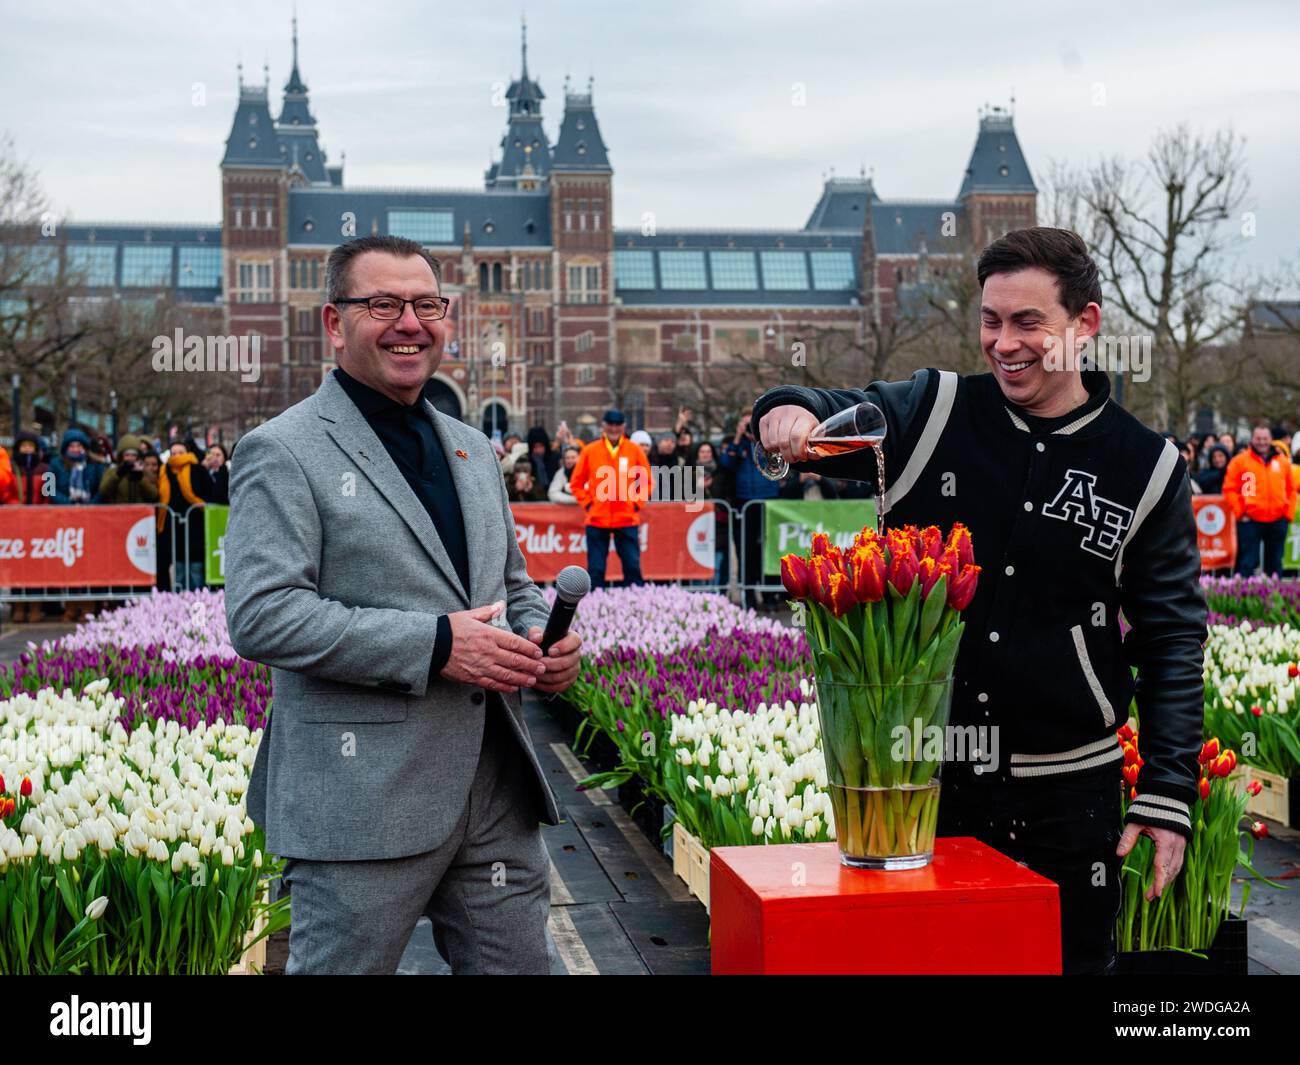 DJ/Producer, Hardwell (right) is seen baptizing with wine his own tulip, in the company of the president of the organization, Arjan Smith. Each year on the 3rd Saturday of January, the National Tulip Day is celebrated in Amsterdam. Dutch tulip growers built a huge picking garden with more than 200,000 colorful tulips at the Museumplein. Visitors are allowed to pick tulips for free.  Because this year the theme is  'Let's Dance', the international Dutch DJ/Producer 'Hardwell' was the special guest to open this event. Stock Photo